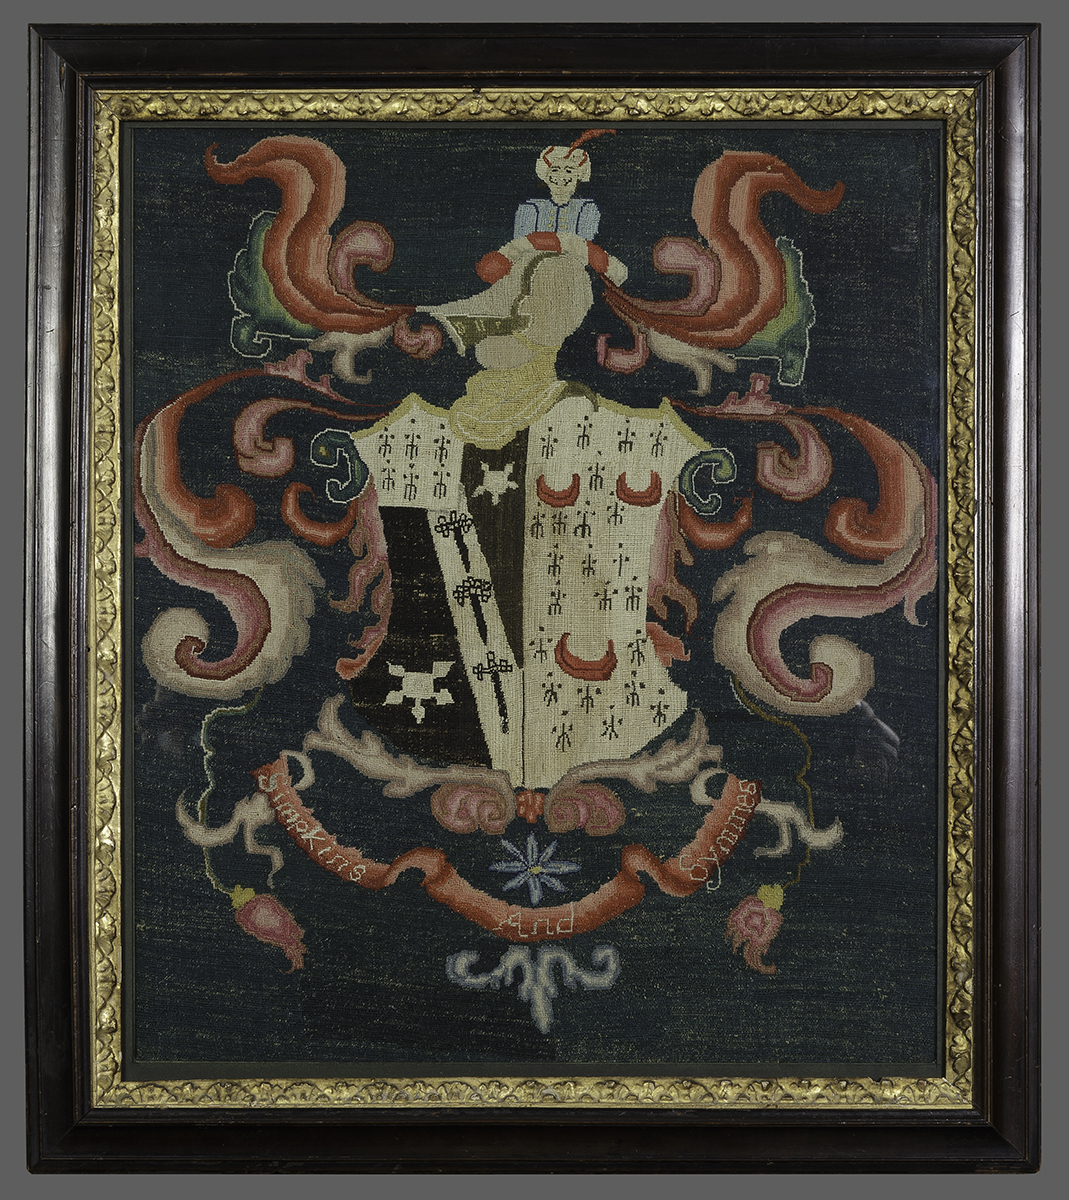 1957.1395 Coat of Arms and 1965.2864 Frame